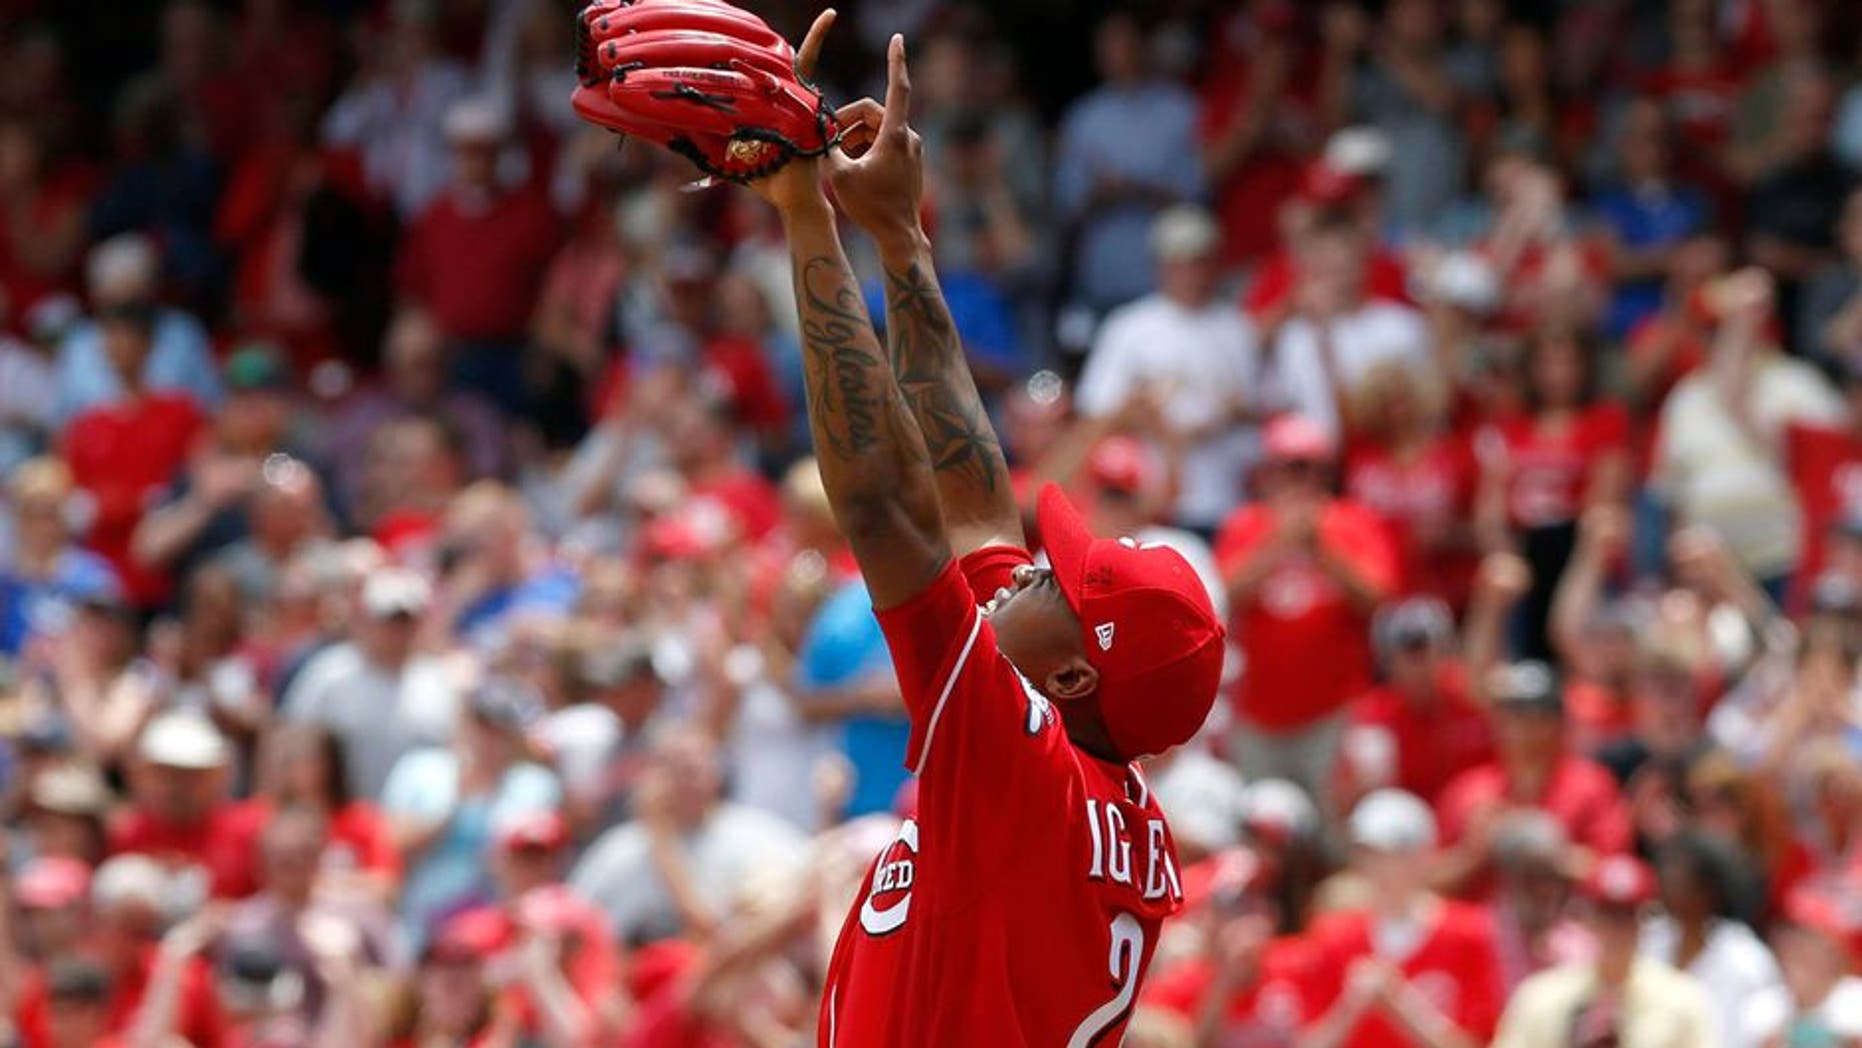 St. Louis sweep: Reds take all four from Cardinals | Fox News